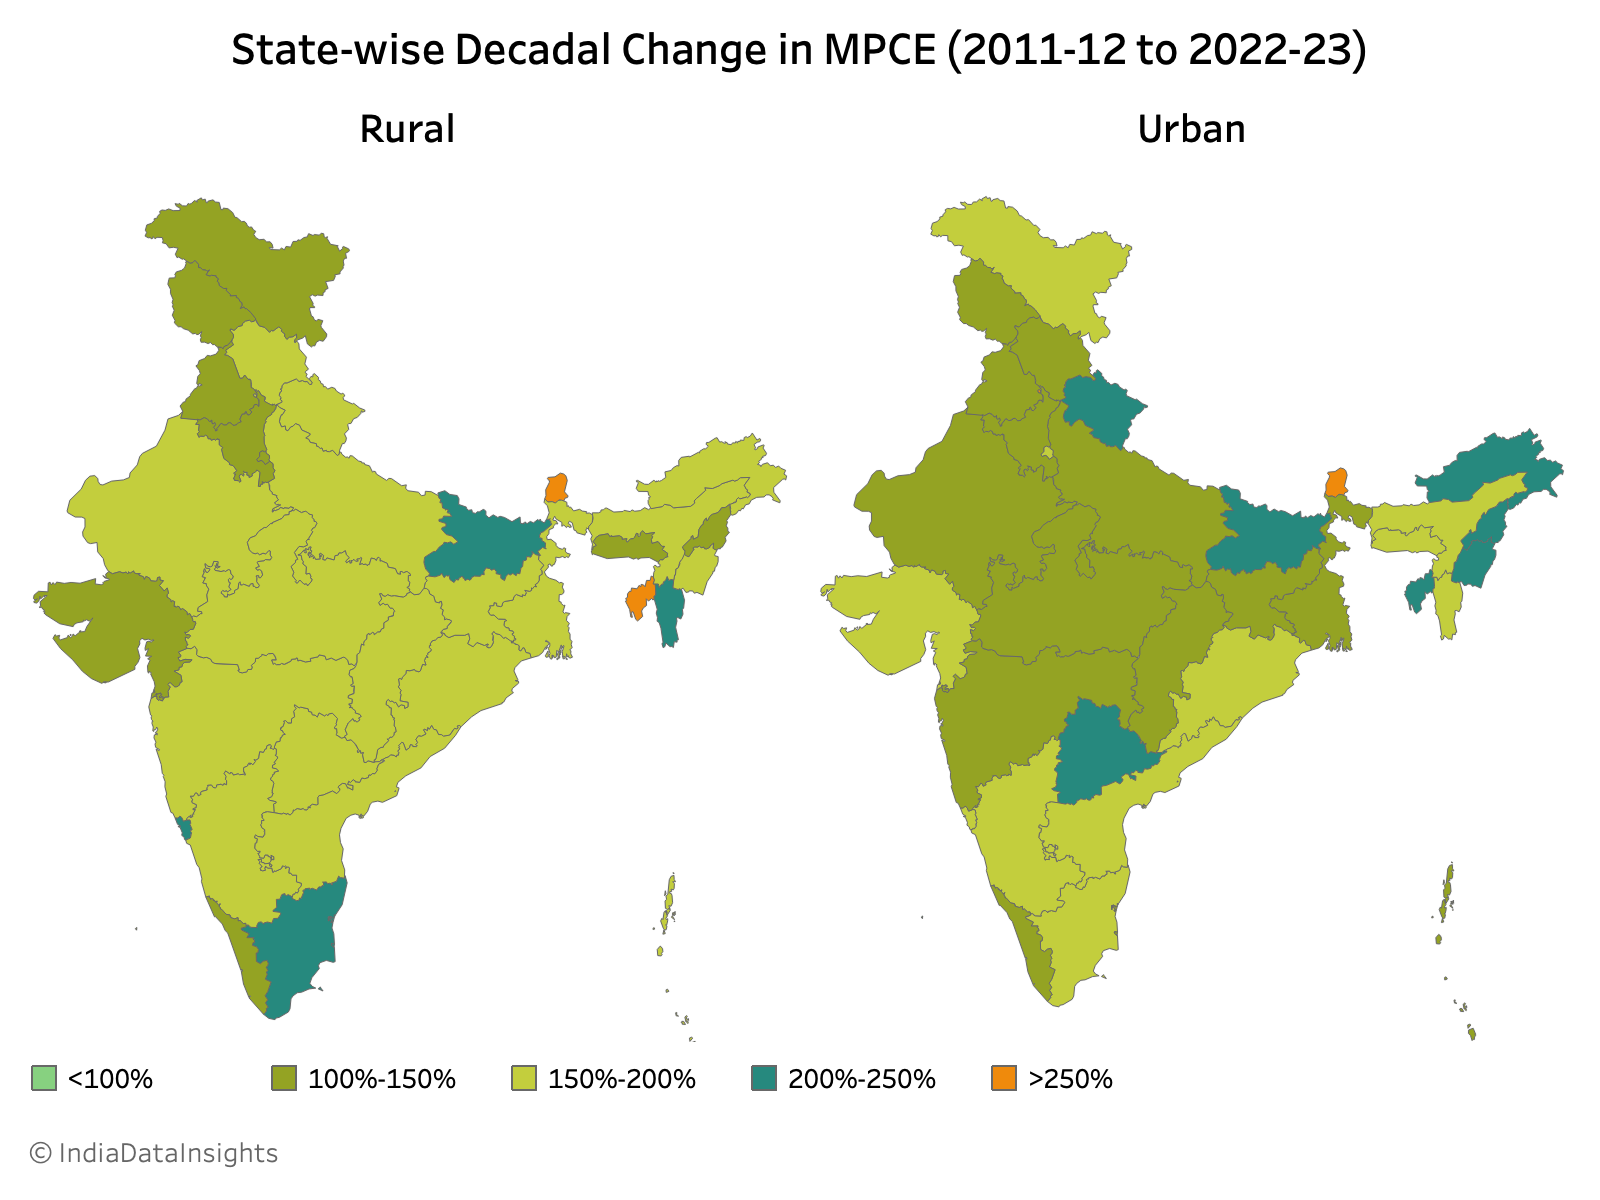 Decadal Change in MPCE across states